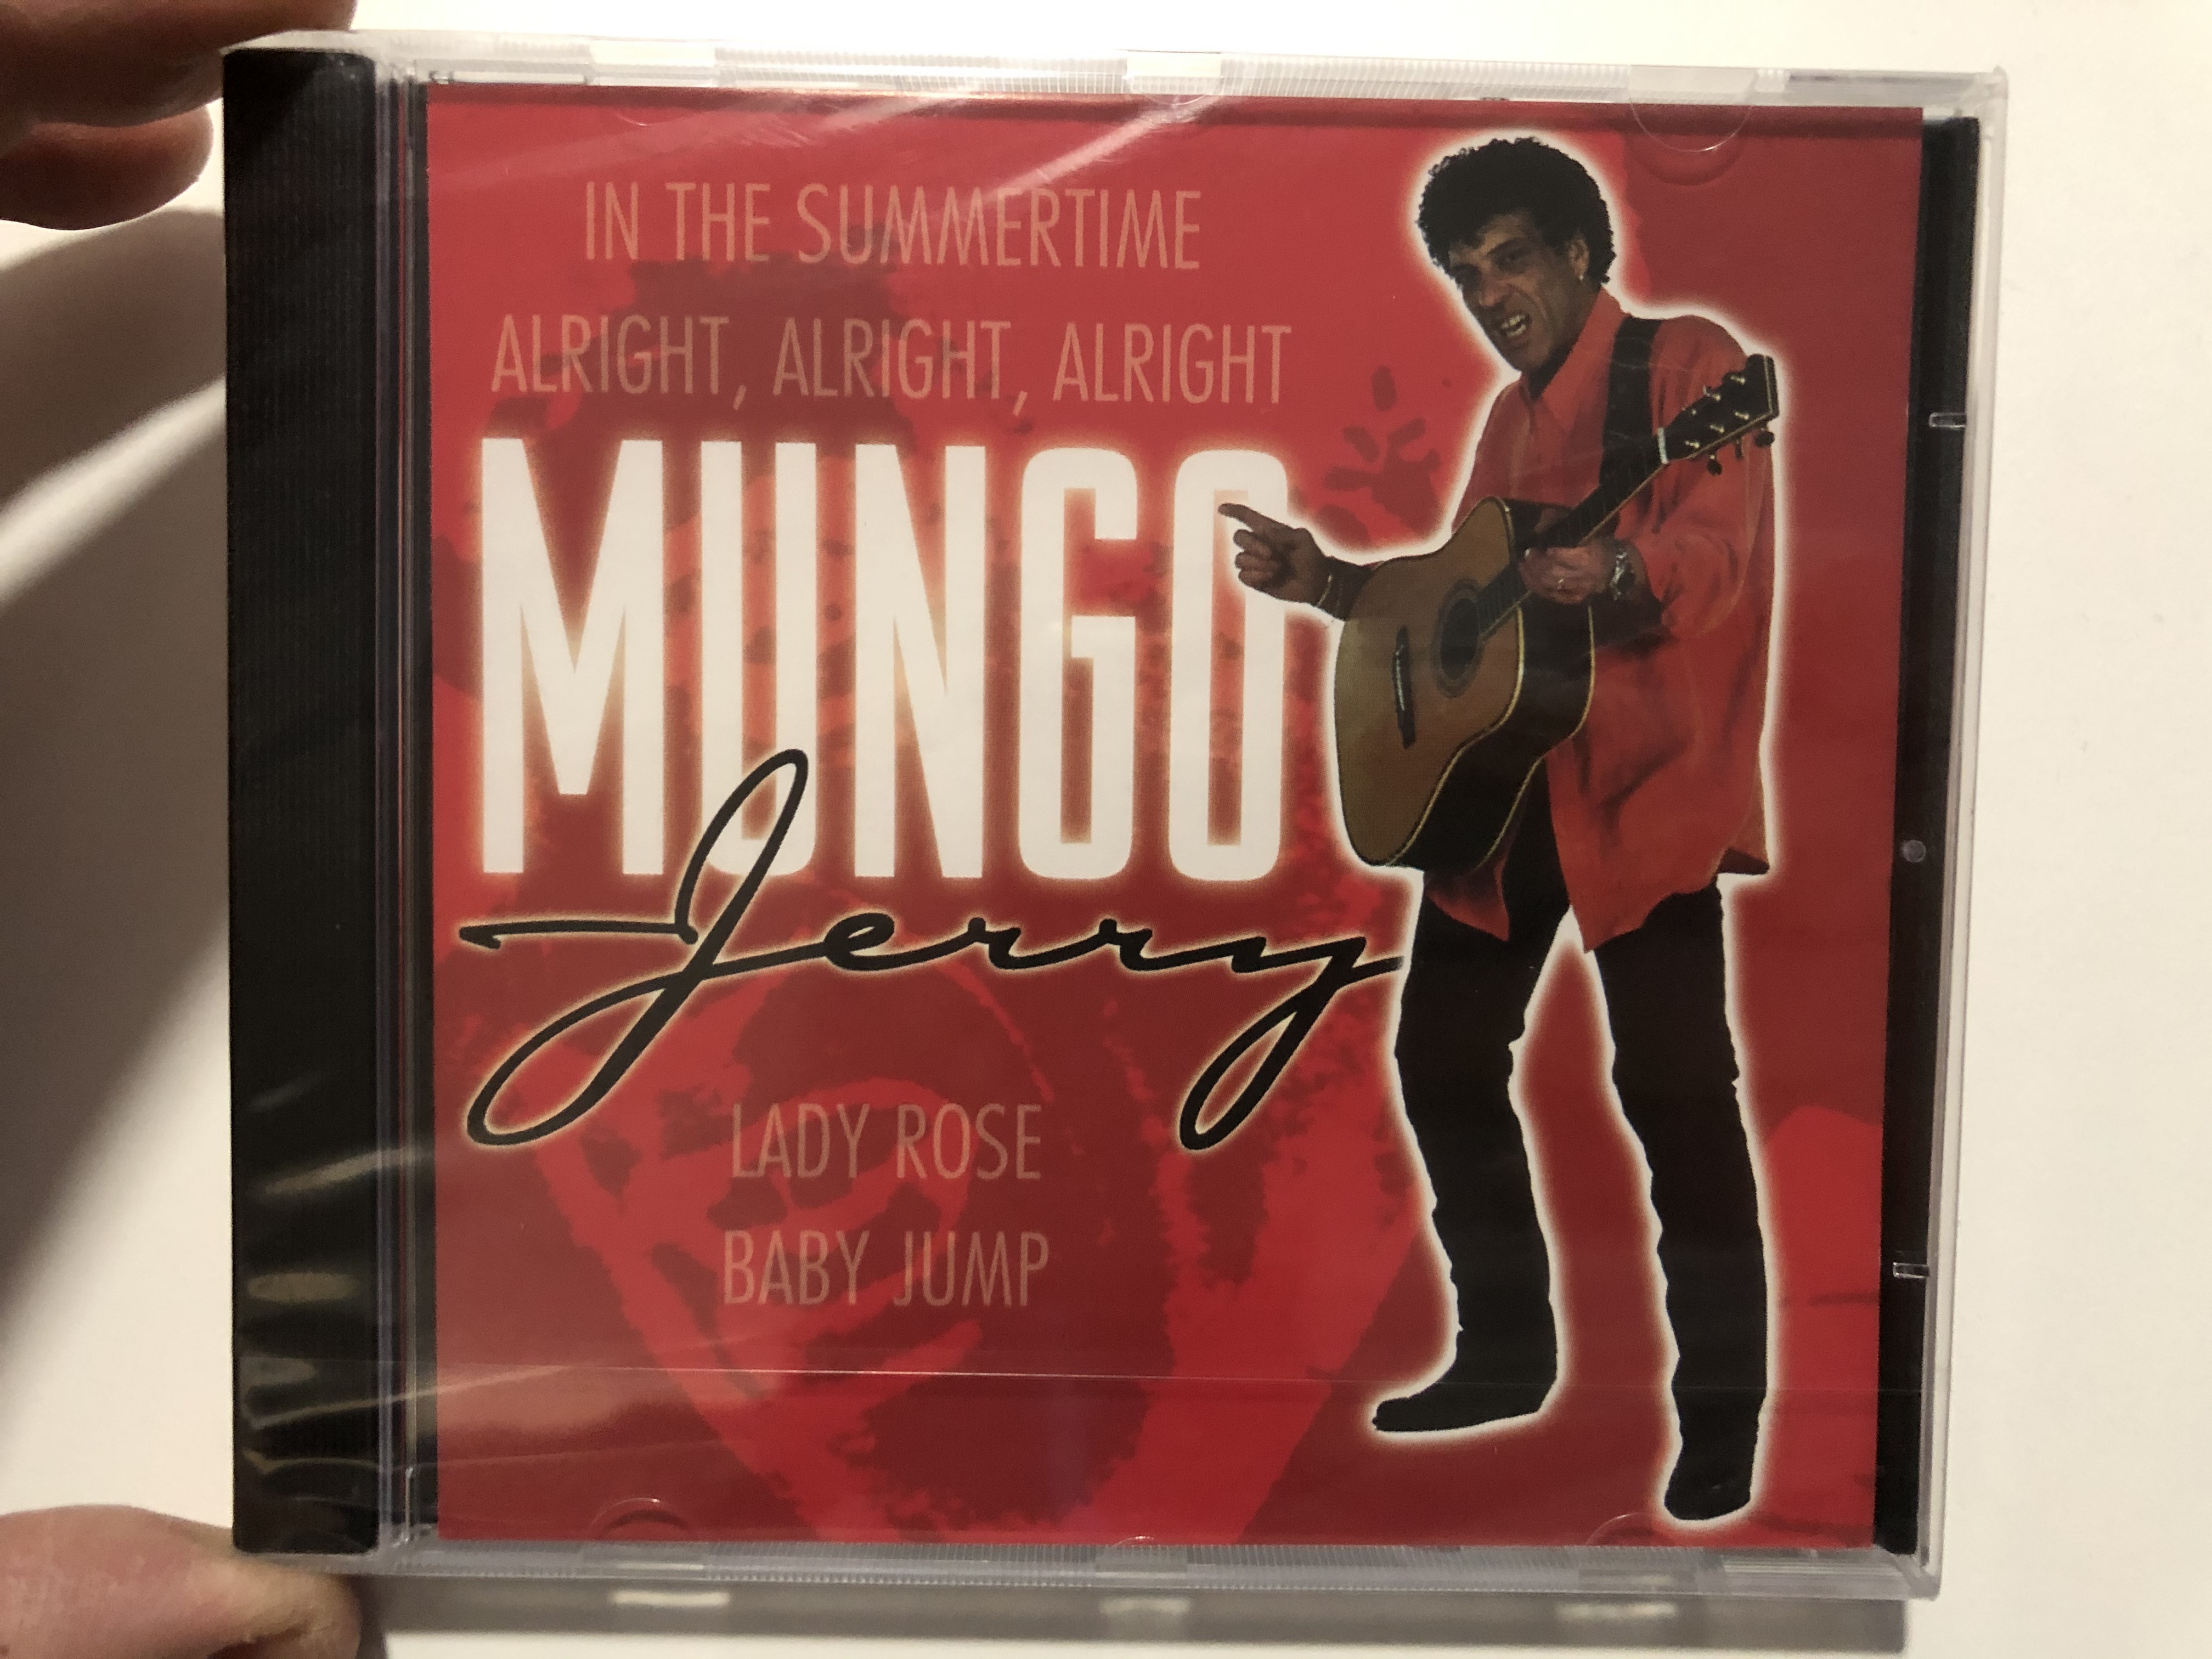 mungo-jerry-in-the-summertime-alright-alright-alright-lady-rose-baby-jump-forever-gold-audio-cd-2001-fg099-1-.jpg